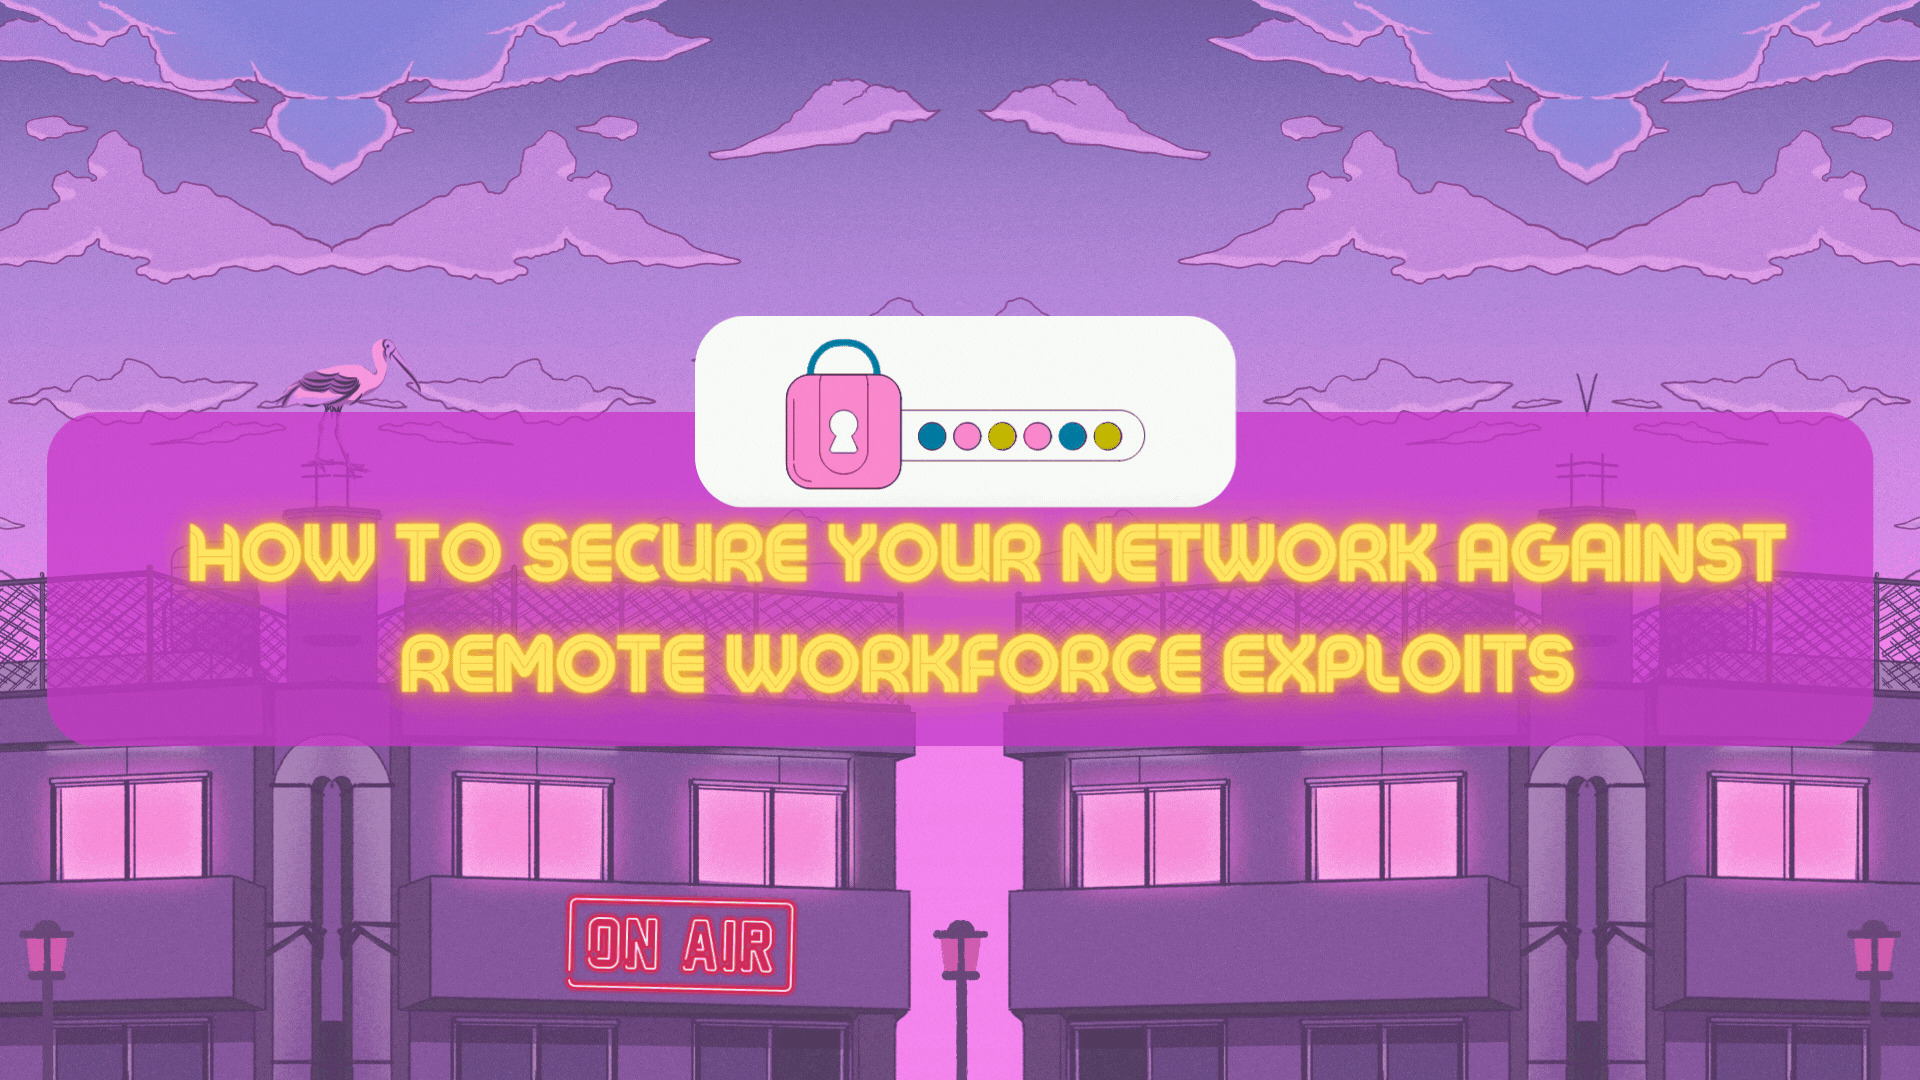 Pandemic-Driven DDoS Attacks How to Secure Your Network Against Remote Workforce Exploits